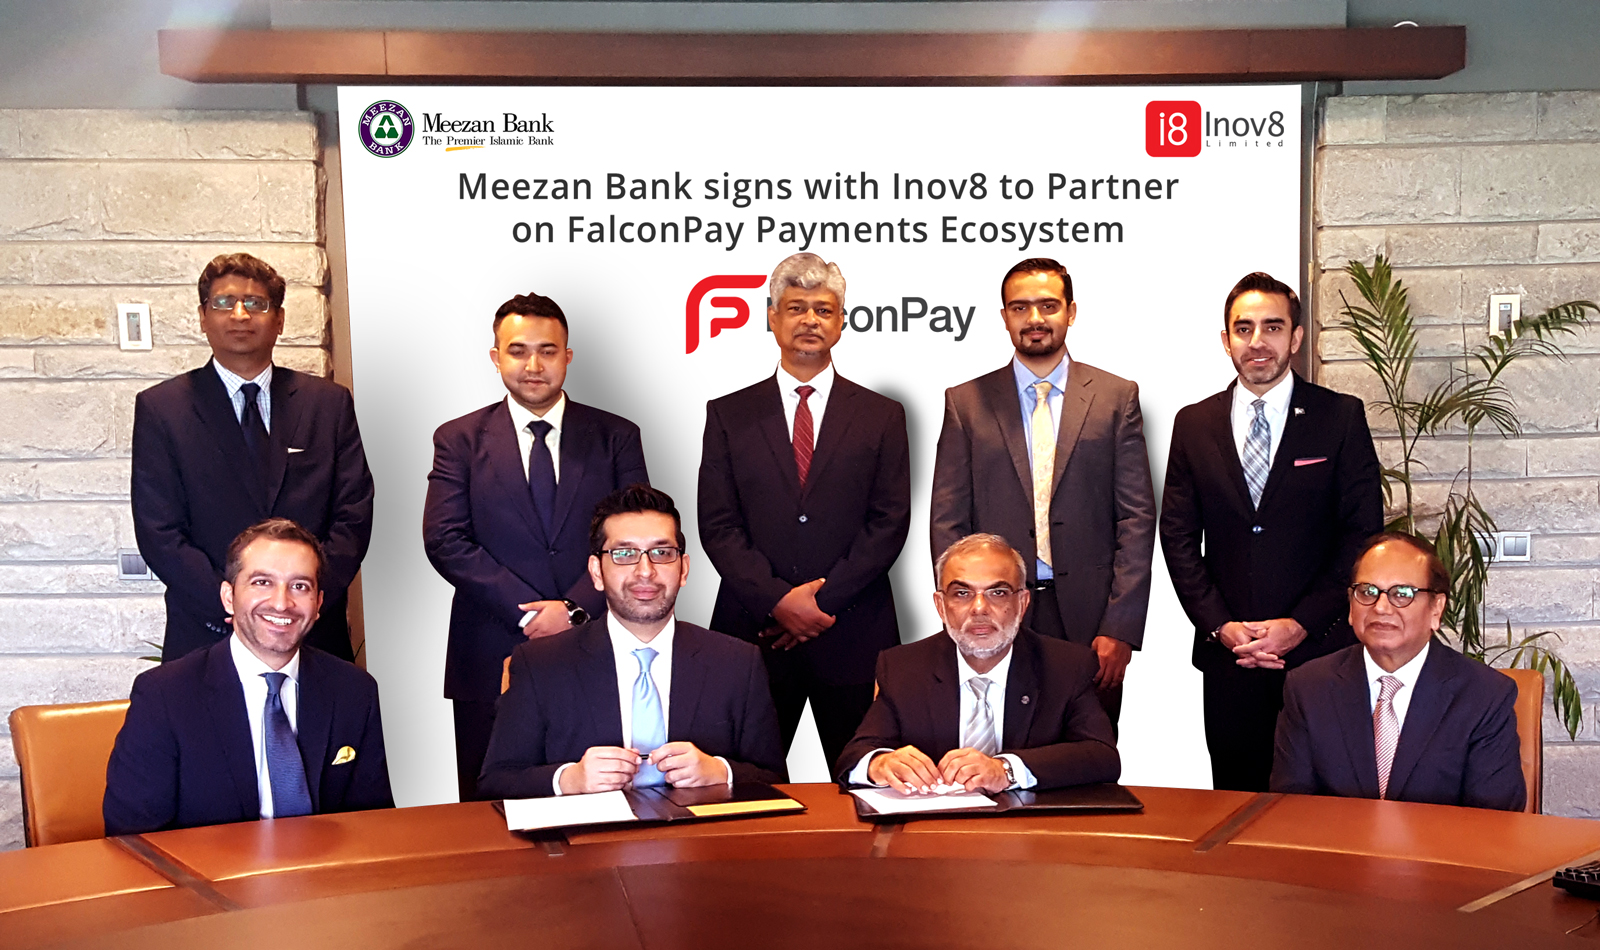 Meezan Bank and Inov8 Partner to Launch FalconPay Payments